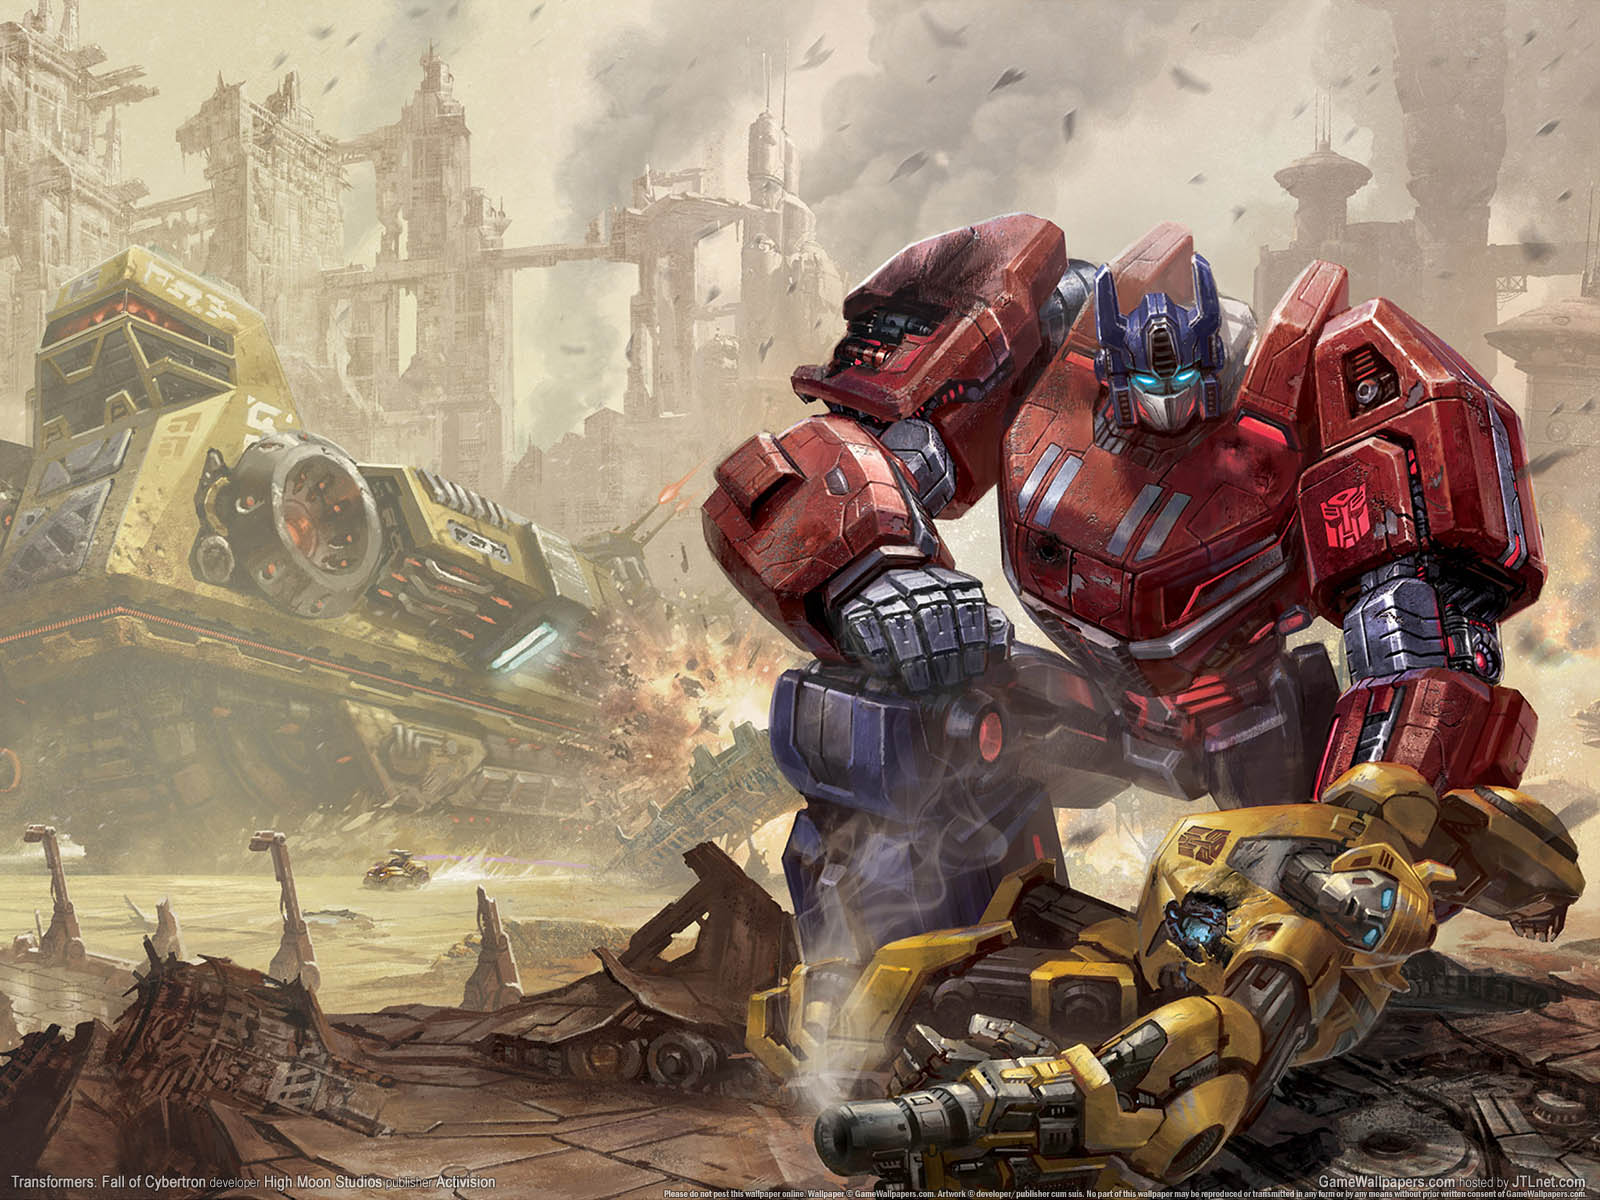 Transformers: Fall of Cybertron achtergrond 01 1600x1200